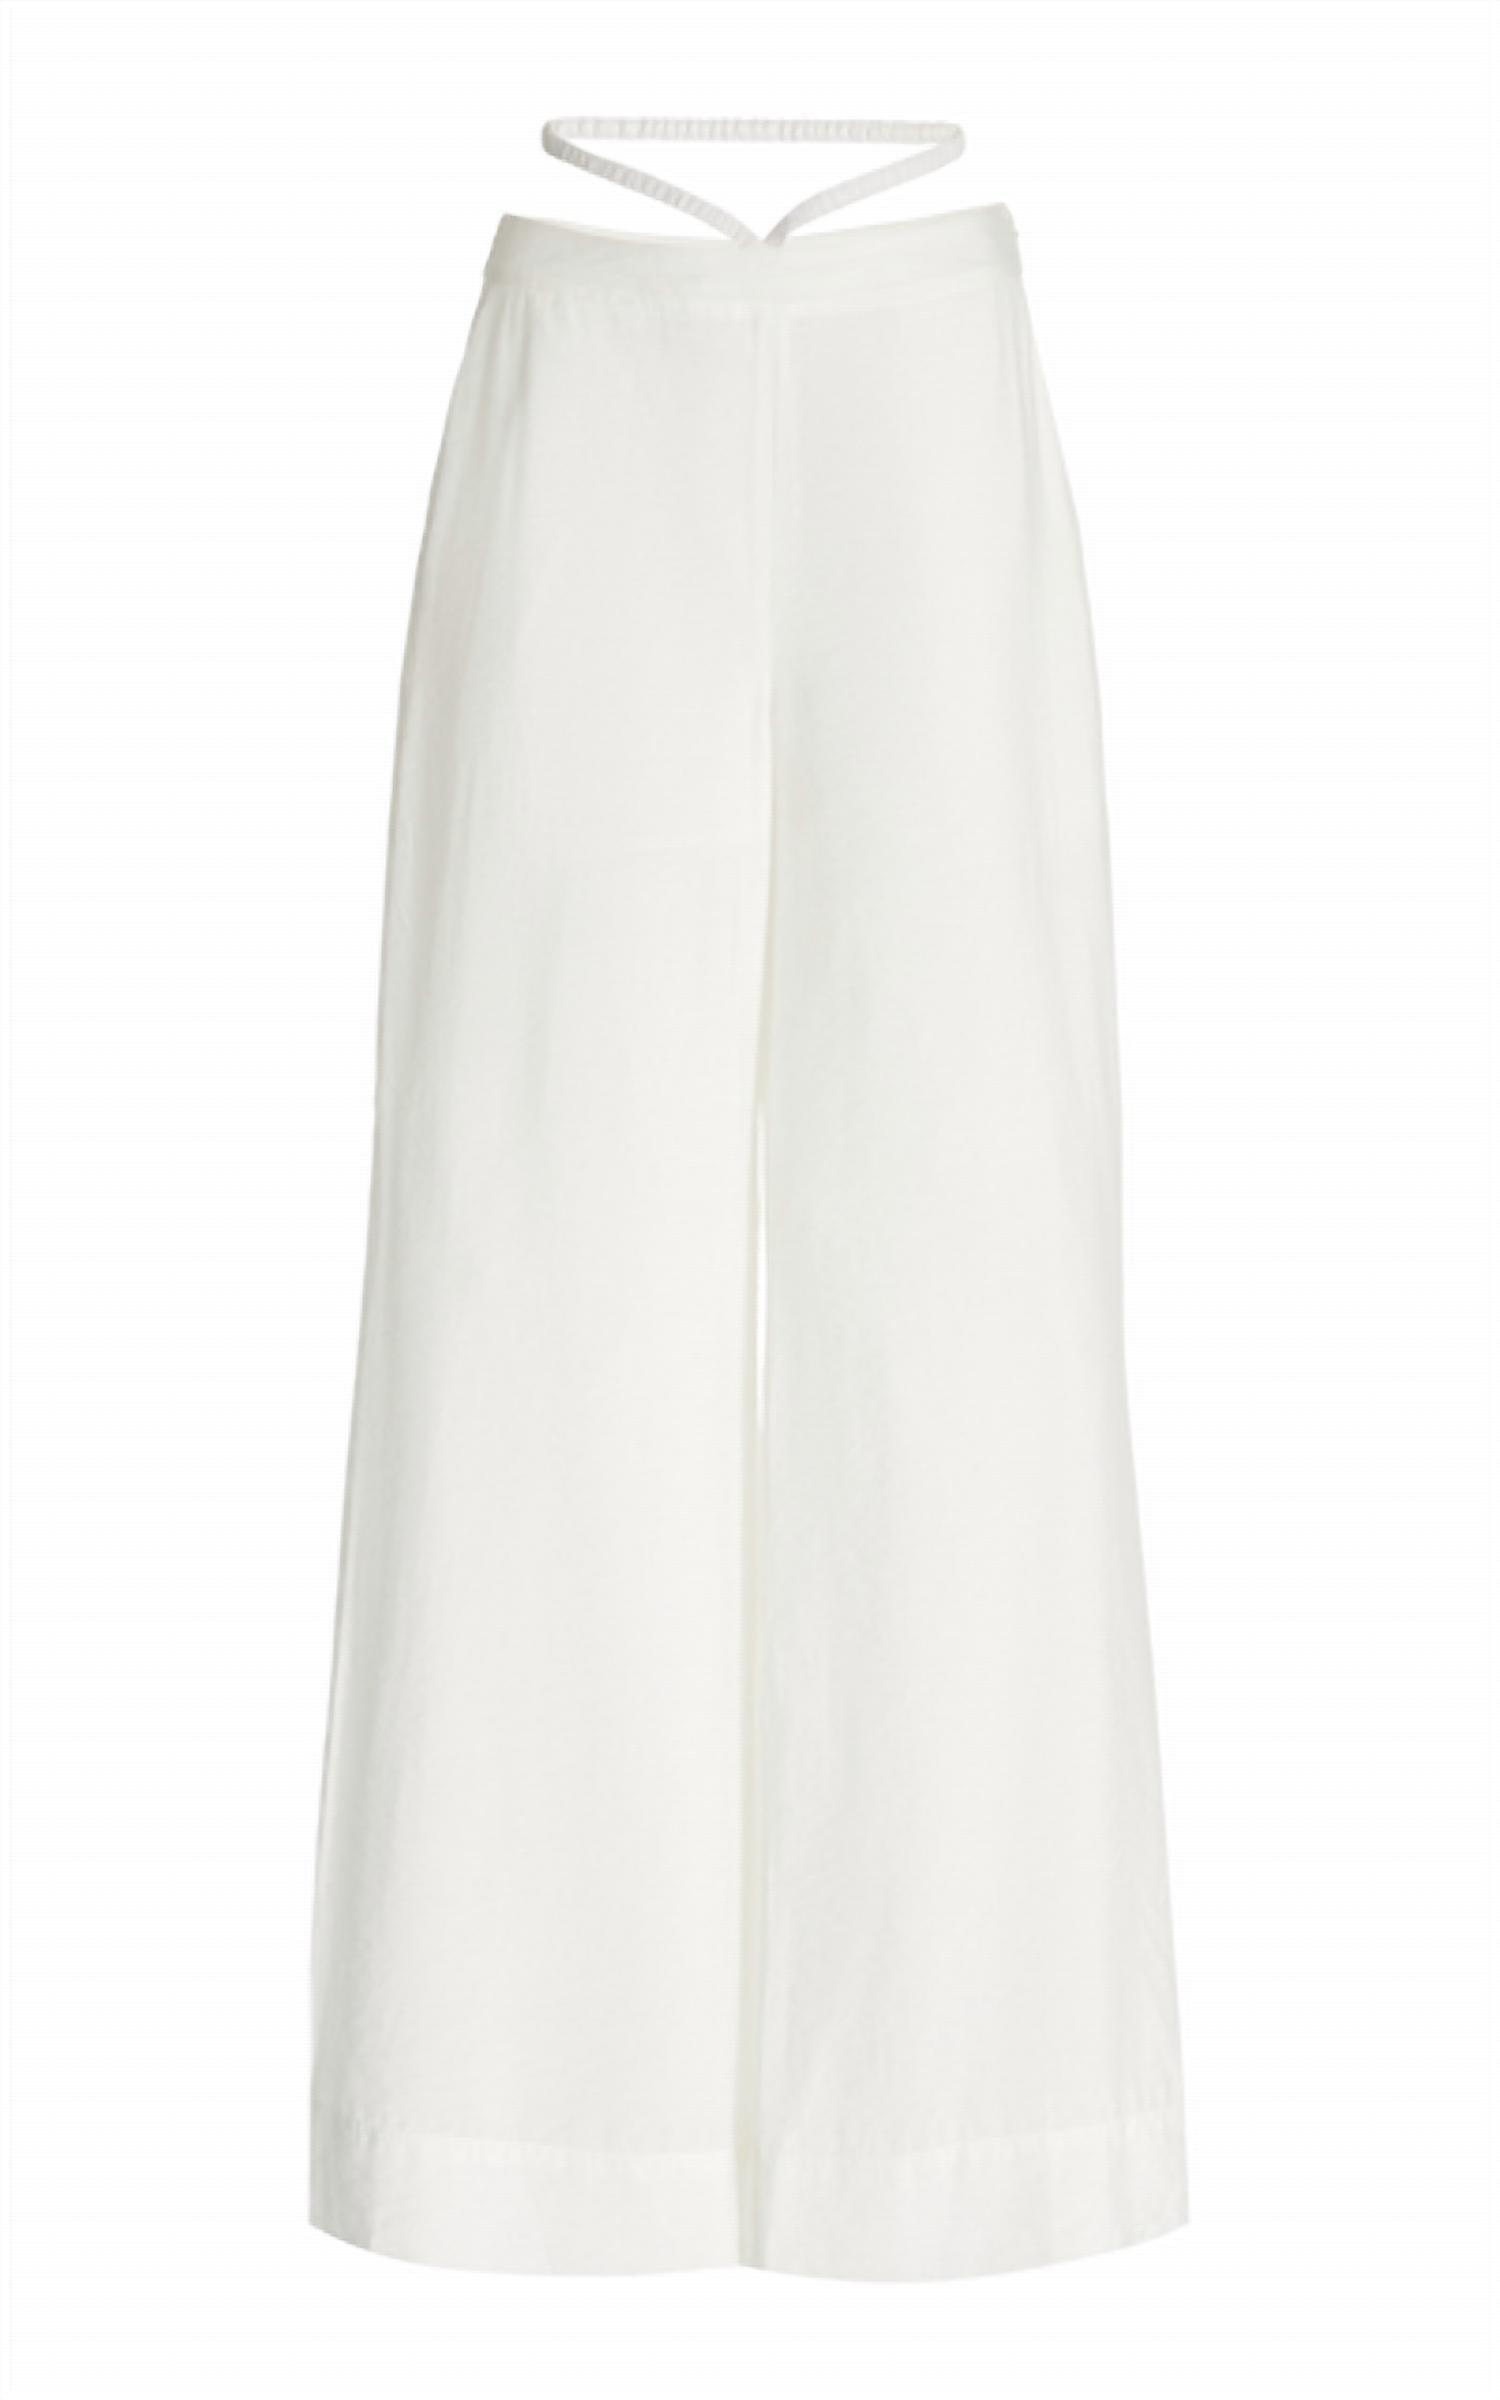 Jonathan Simkhai Marigold Solid Strappy Wide Leg Pants in White | Lyst